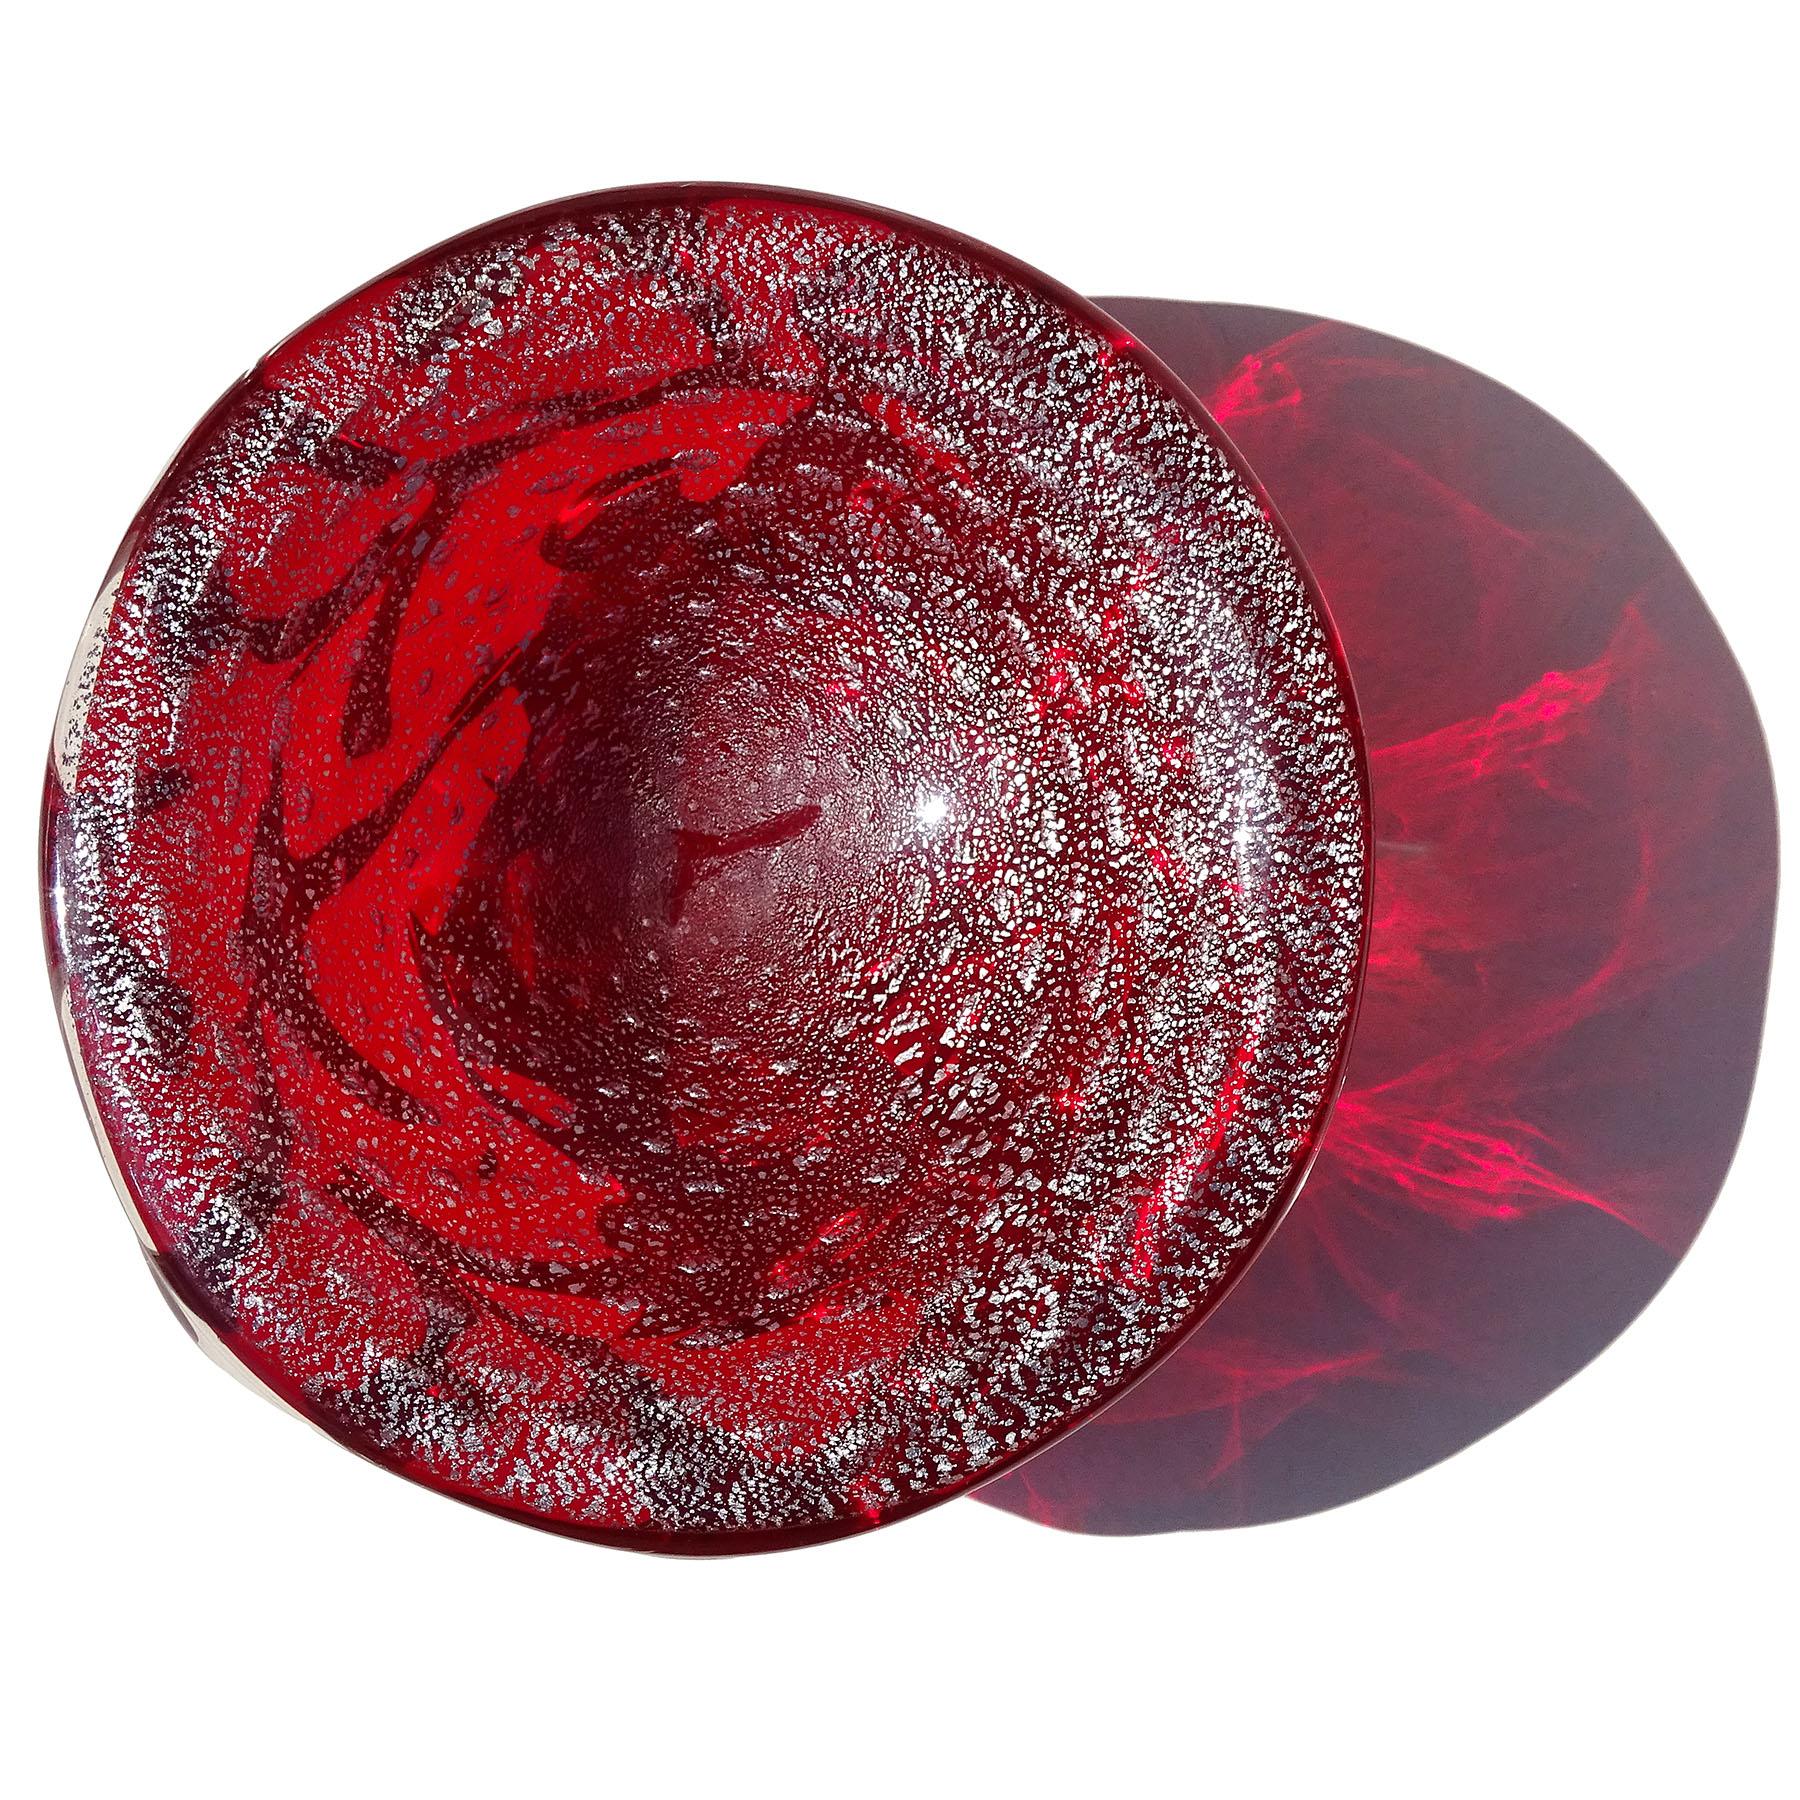 Mid-Century Modern A.Ve.M. Radi Murano Red Silver Fleck Italian Art Glass Sculptural Surface Bowl For Sale